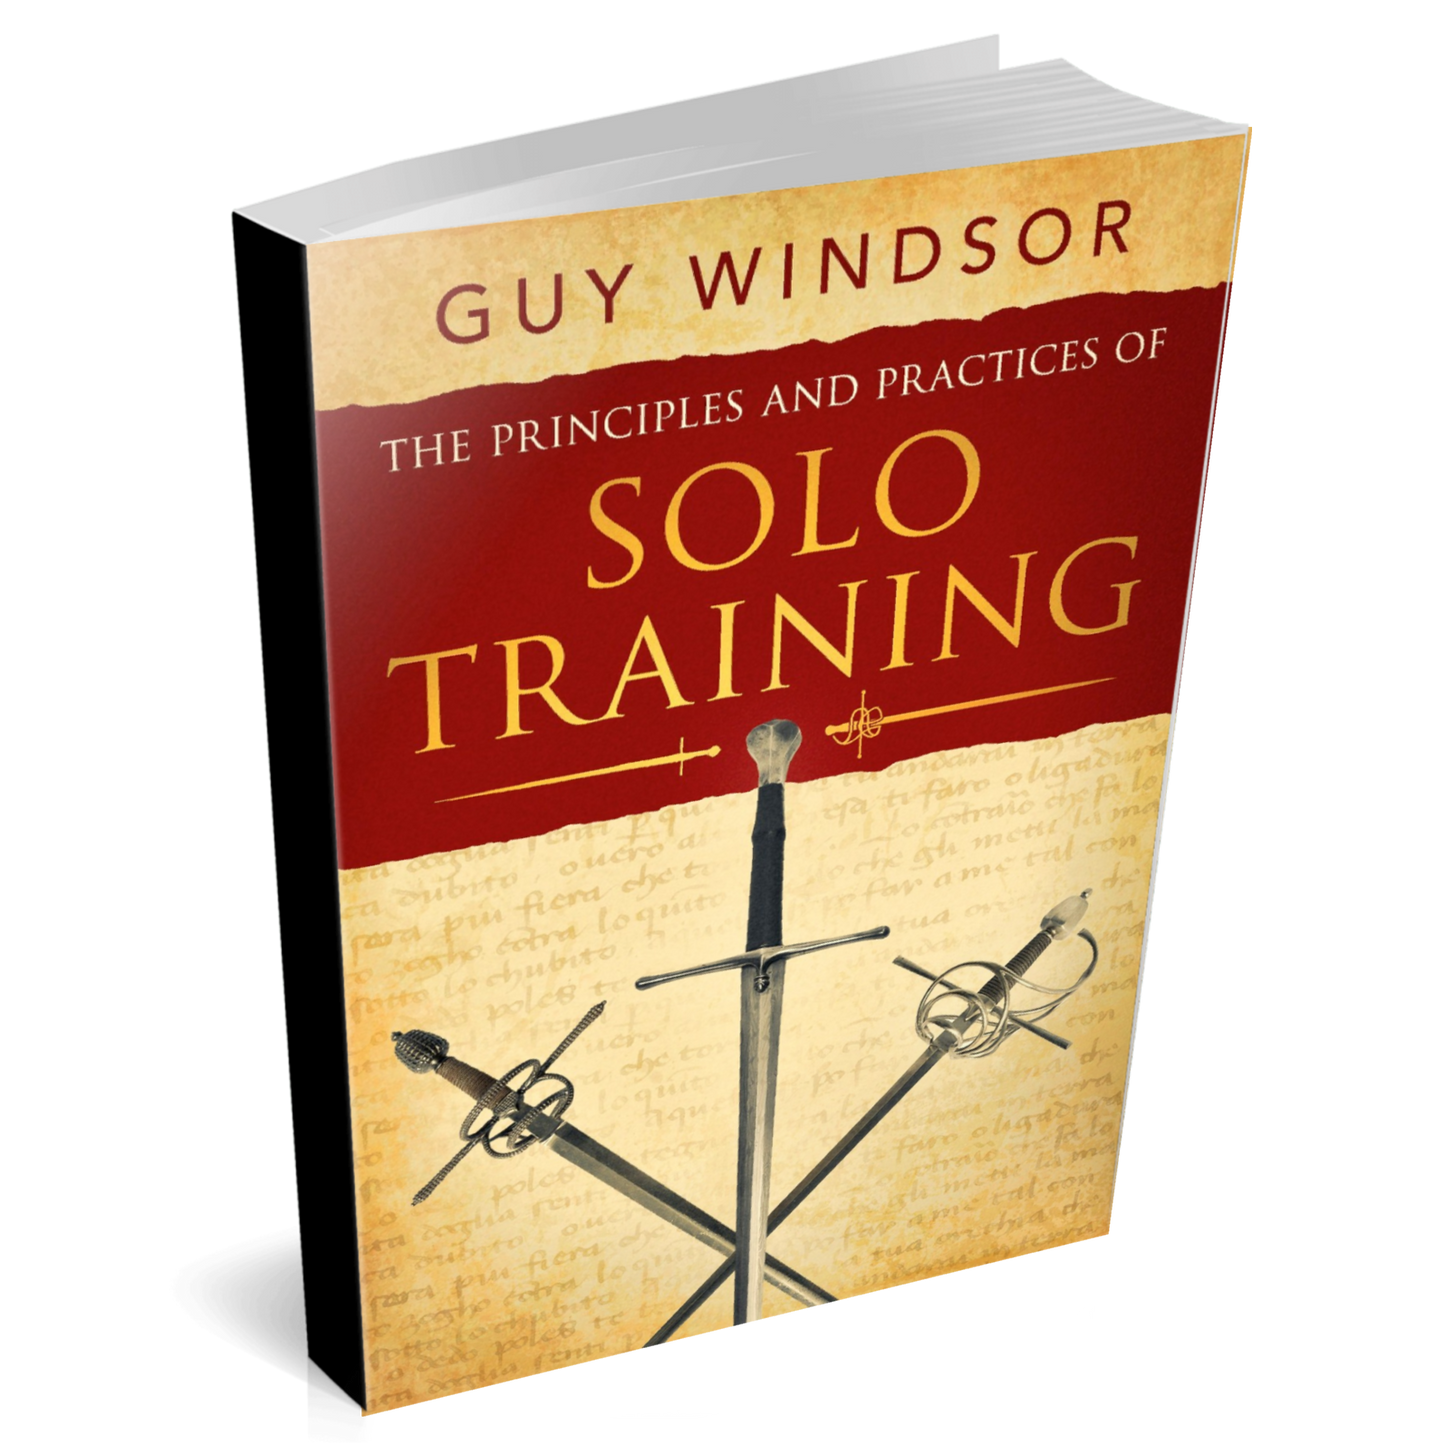 The Principles and Practices of Solo Training: A Guide for Historical Martial Artists, Sword People, and Everyone Else (Paperback))